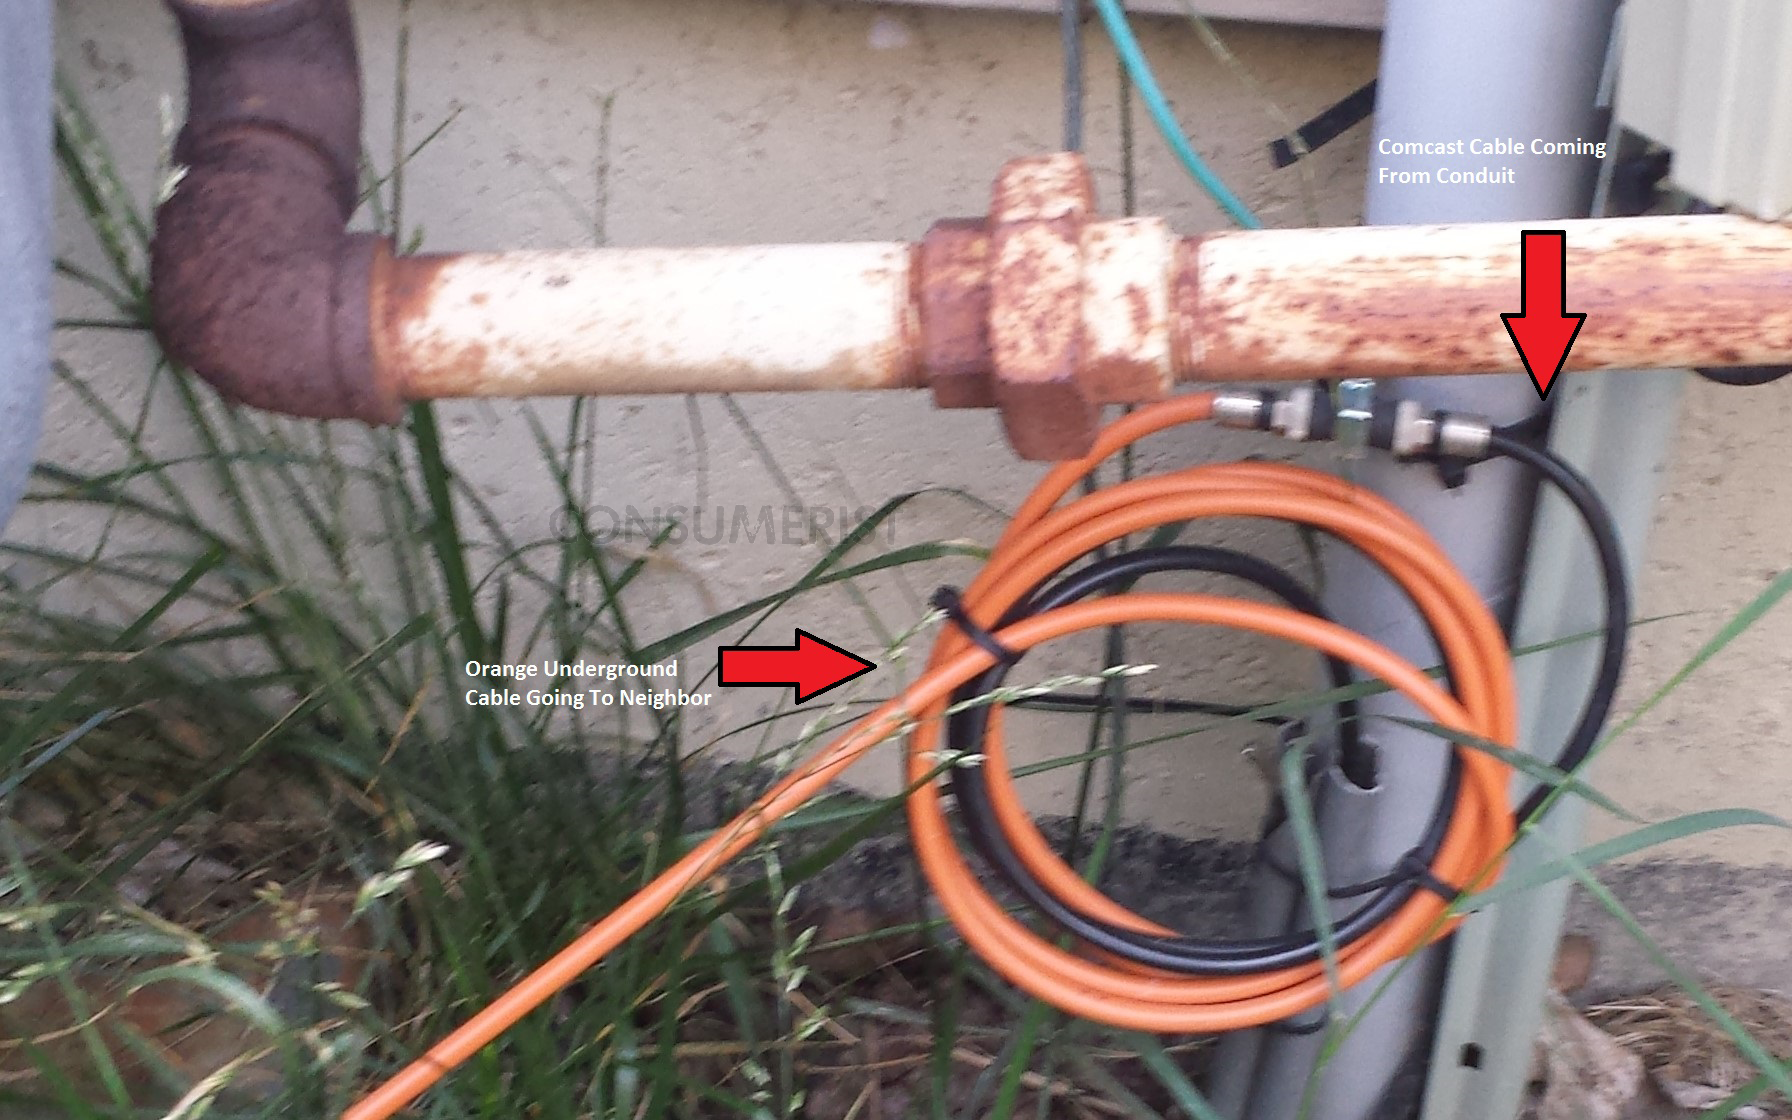 The black cable comes up from the ground and is supposed to go into the house. Instead, it's been pulled out of the conduit and connected to the orange underground-grade cable, which runs down the side yard to a neighboring property (see photo below).